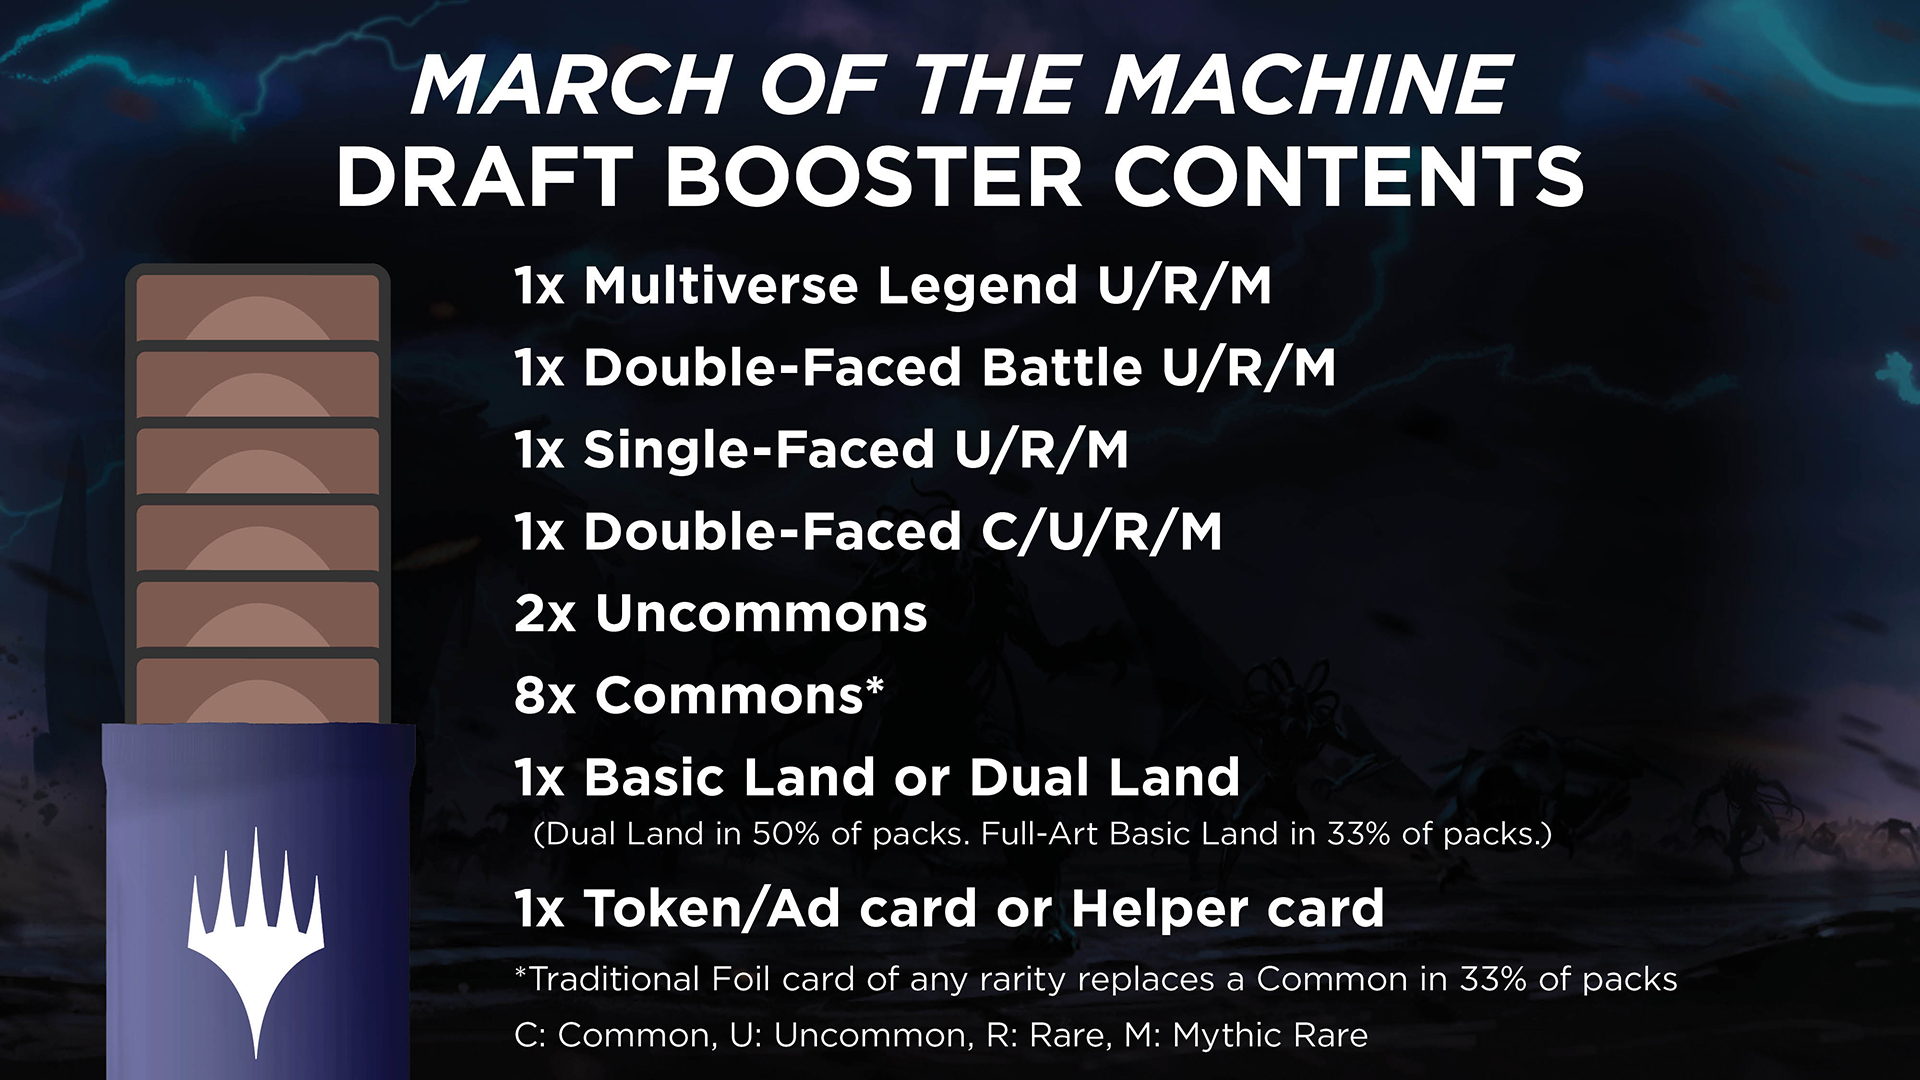 March of the Machine Draft Booster Contents